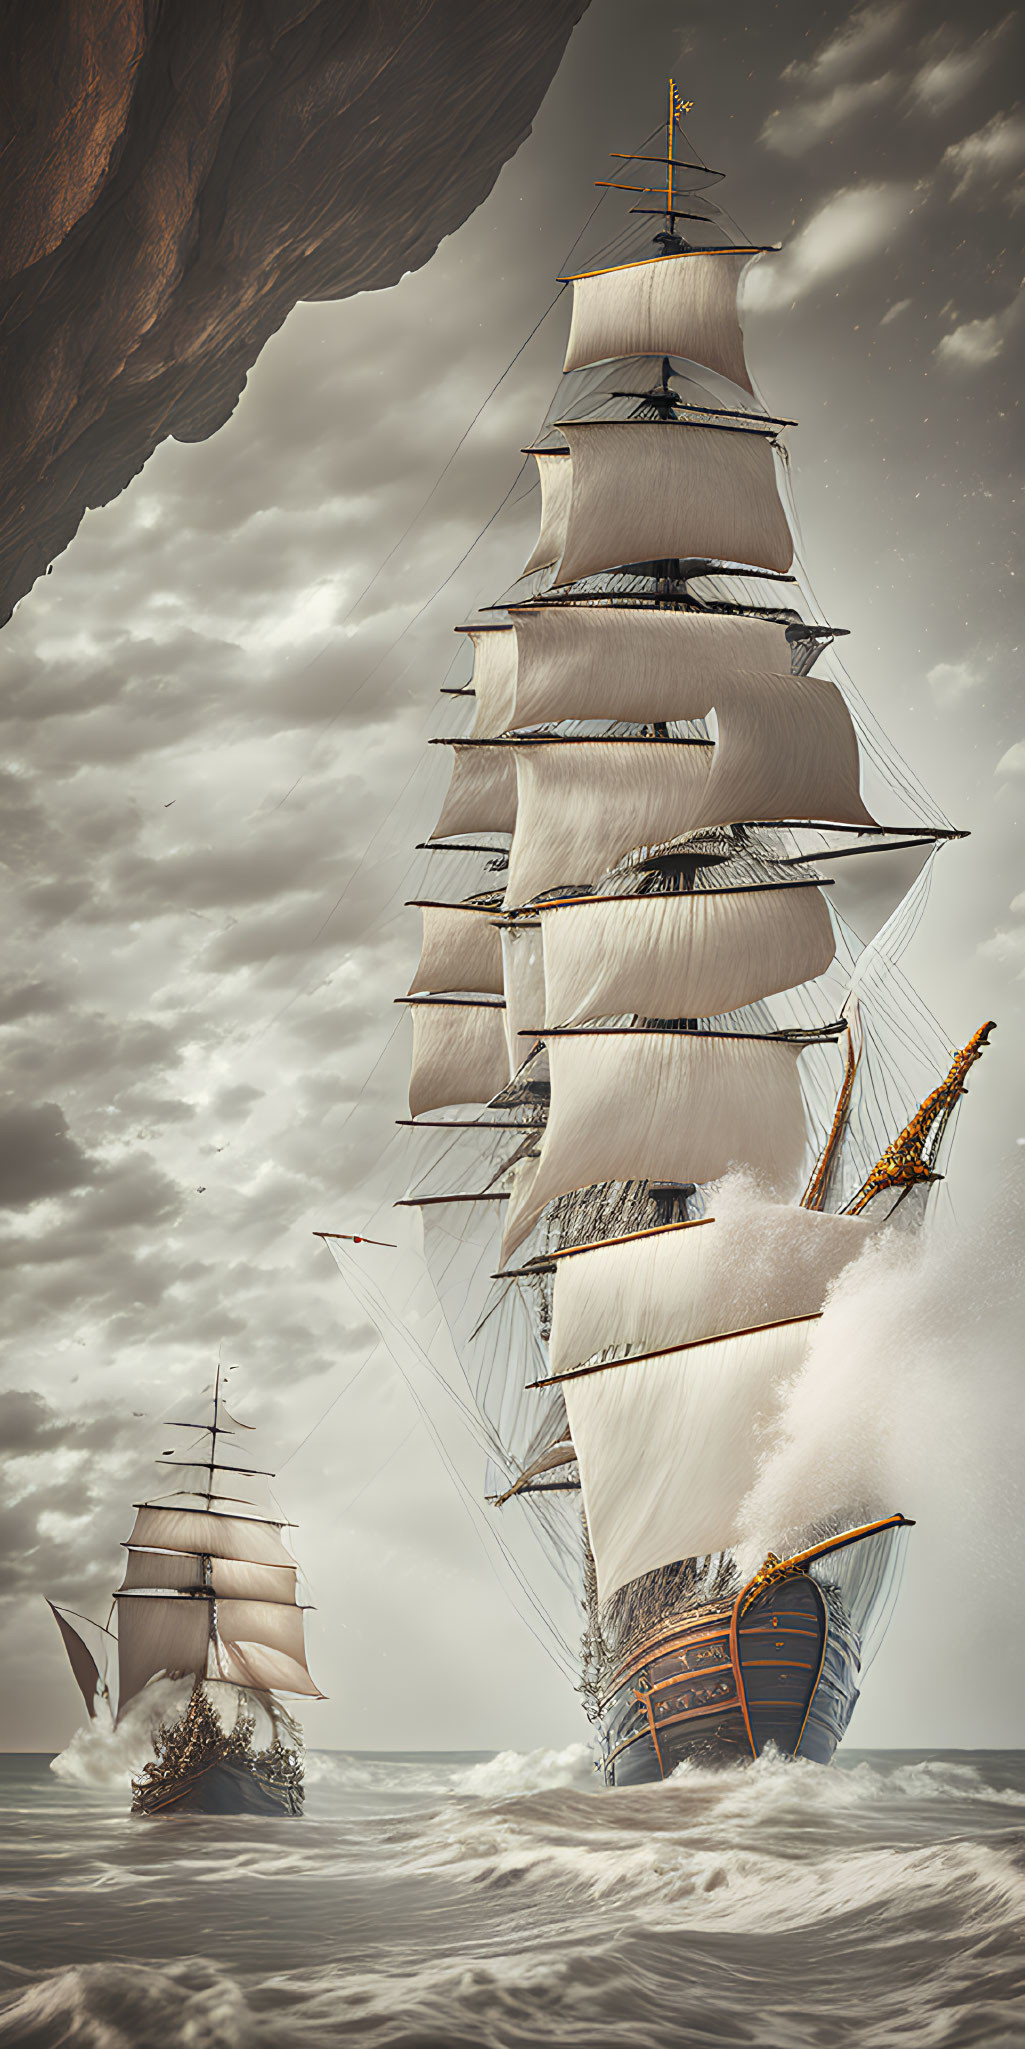 Tall ship with white sails navigating choppy seas and another ship in background under brooding sky